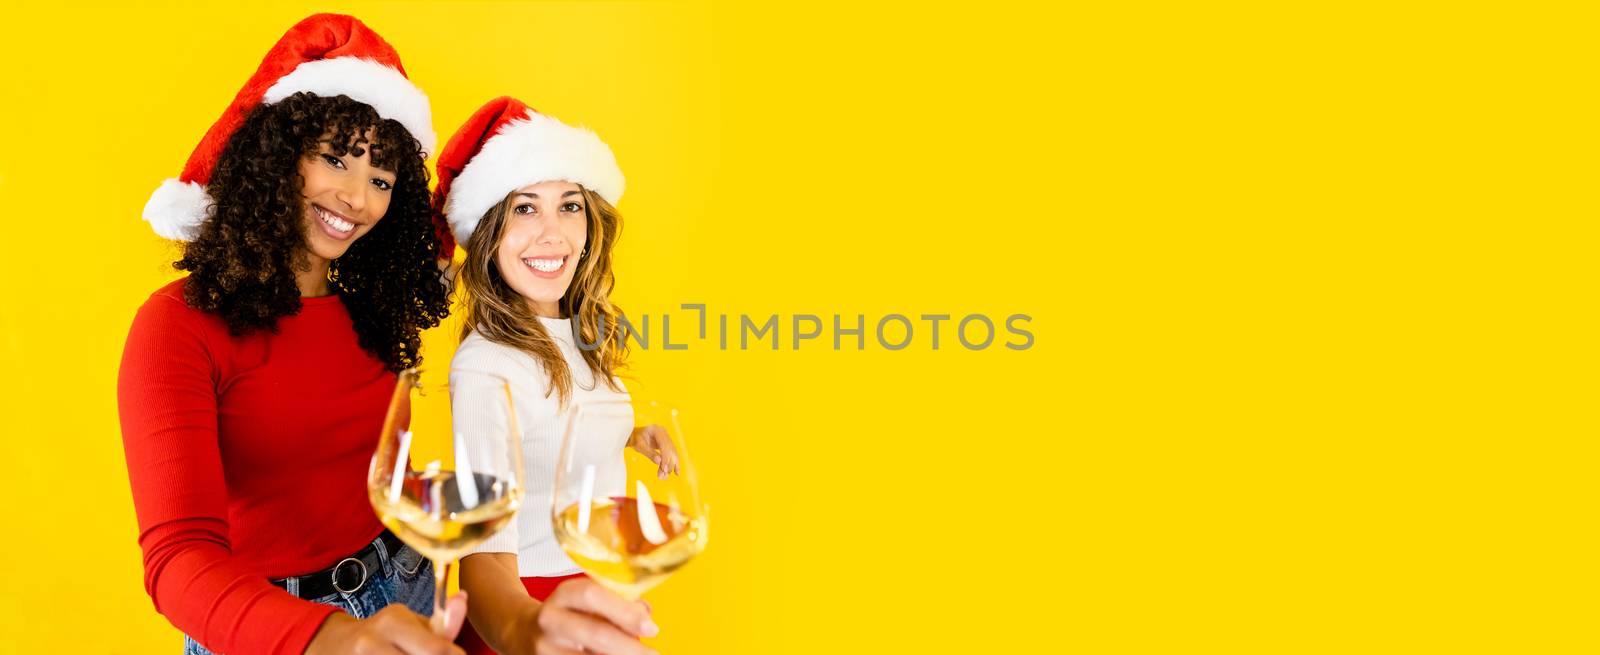 Toasting to Christmas together regardless of diversity - Two women, black Hispanic and Caucasian wearing Santa hat, looking at the camera holding a glass of white wine on big yellow copy space by robbyfontanesi